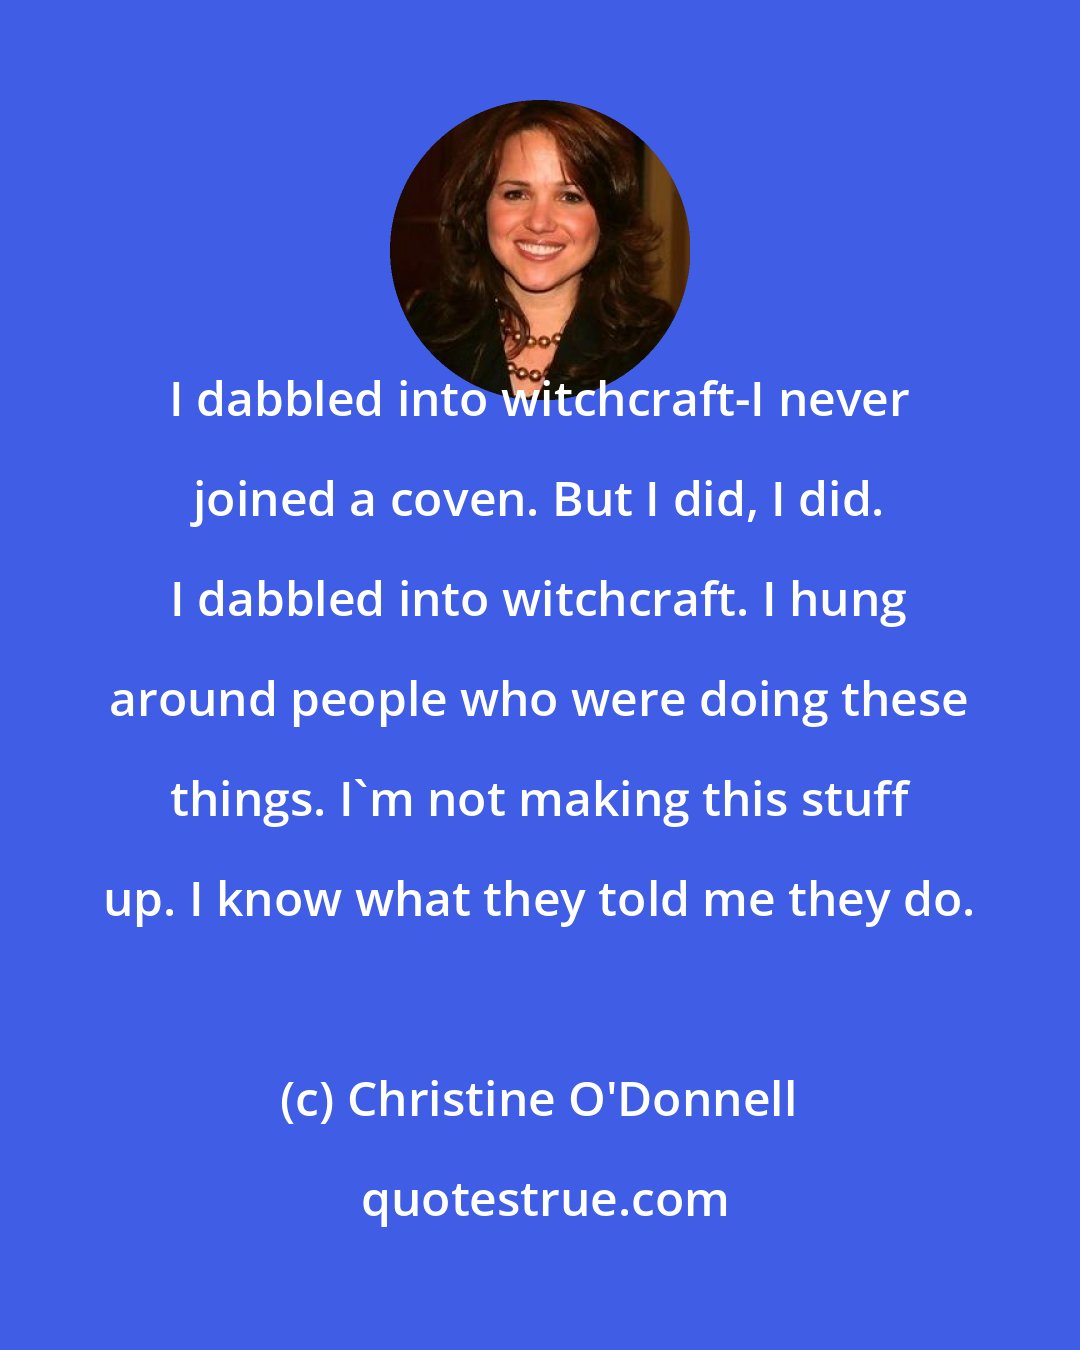 Christine O'Donnell: I dabbled into witchcraft-I never joined a coven. But I did, I did. I dabbled into witchcraft. I hung around people who were doing these things. I'm not making this stuff up. I know what they told me they do.